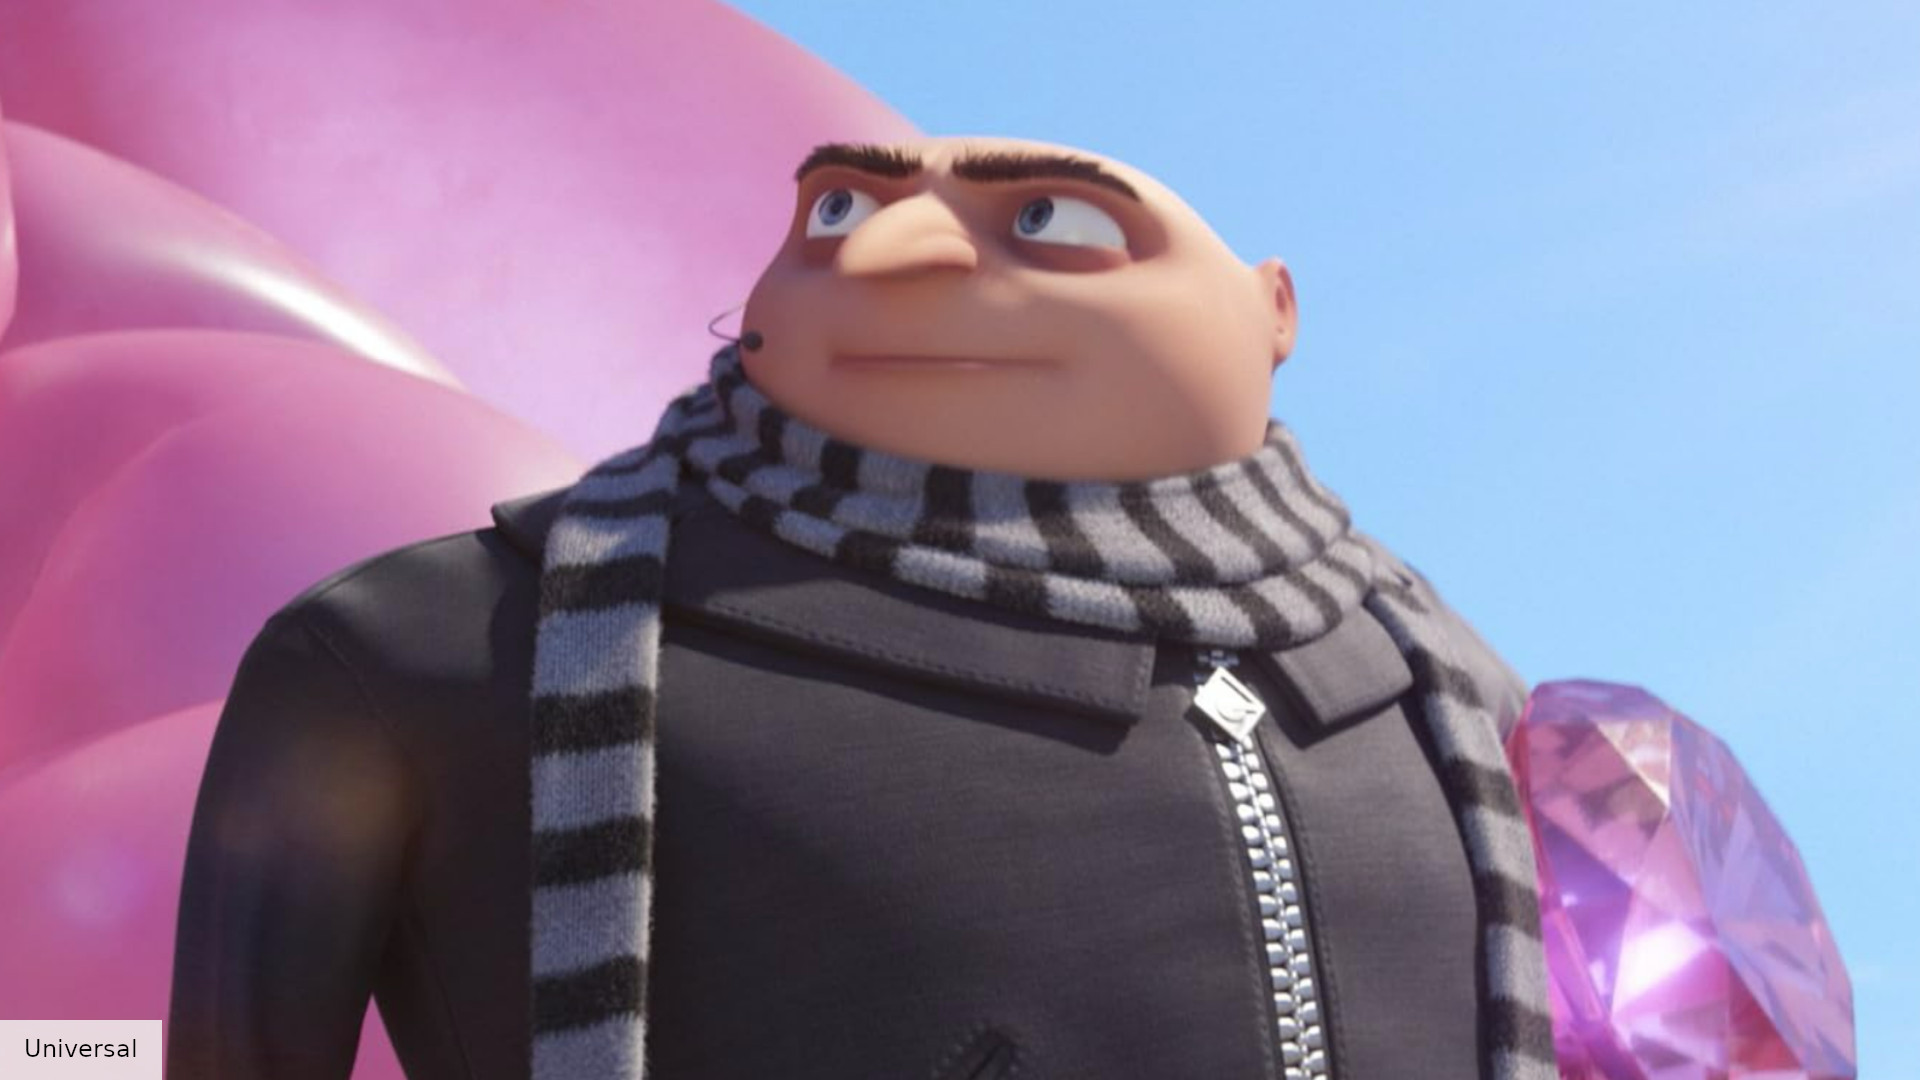 Despicable Me 4 release date, cast, plot, and news